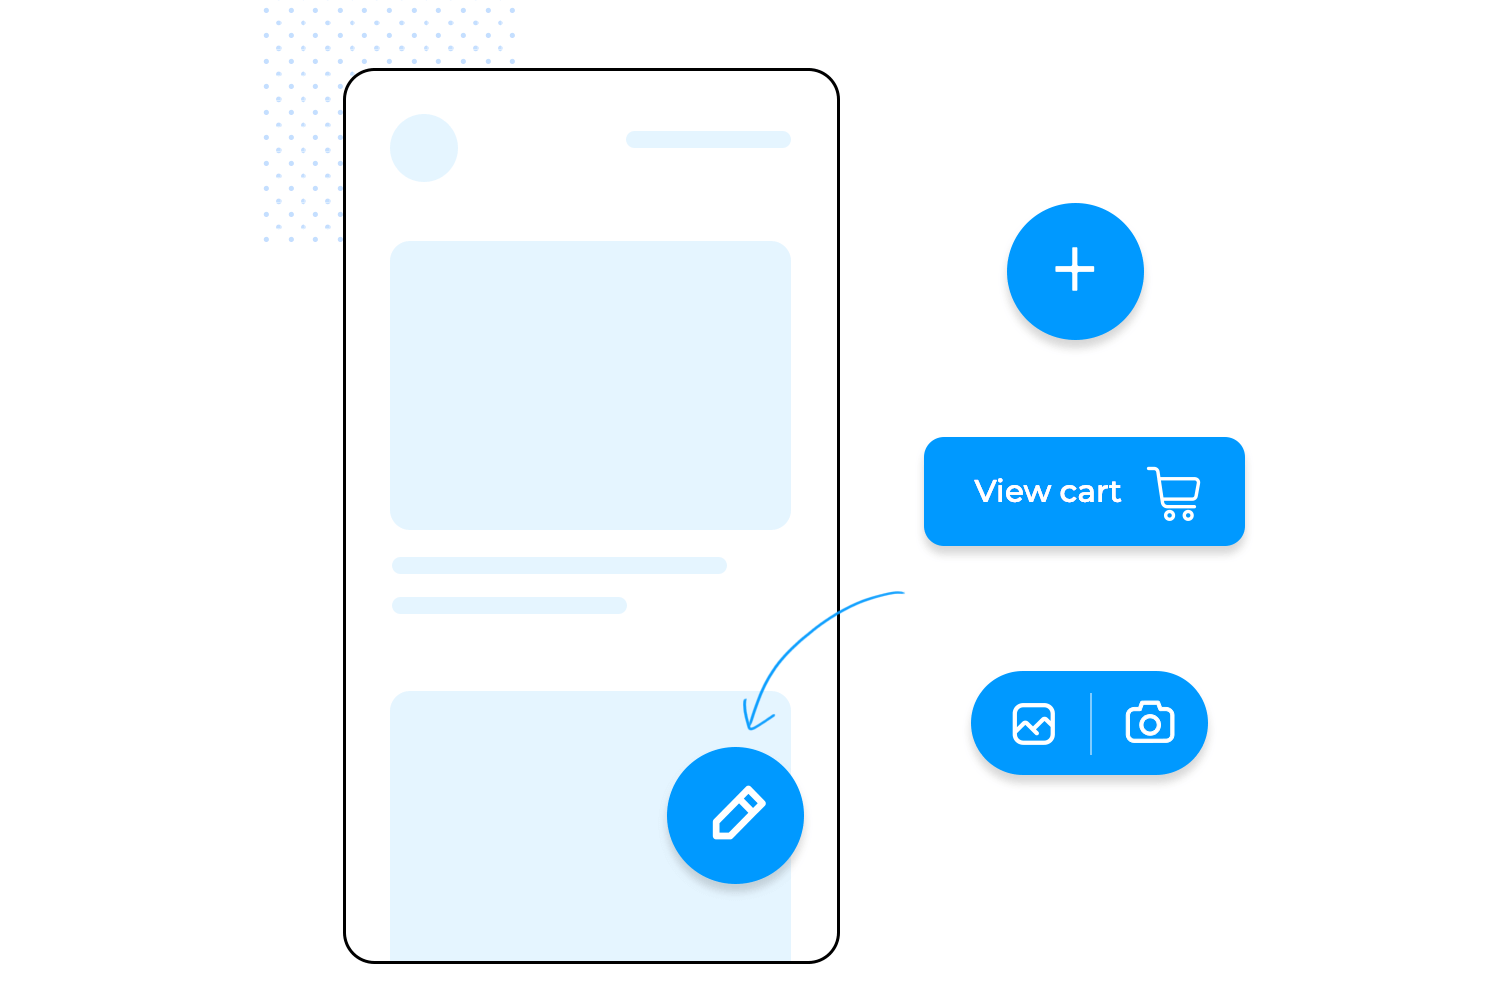 Floating action button (FAB) and navigation buttons on a mobile interface